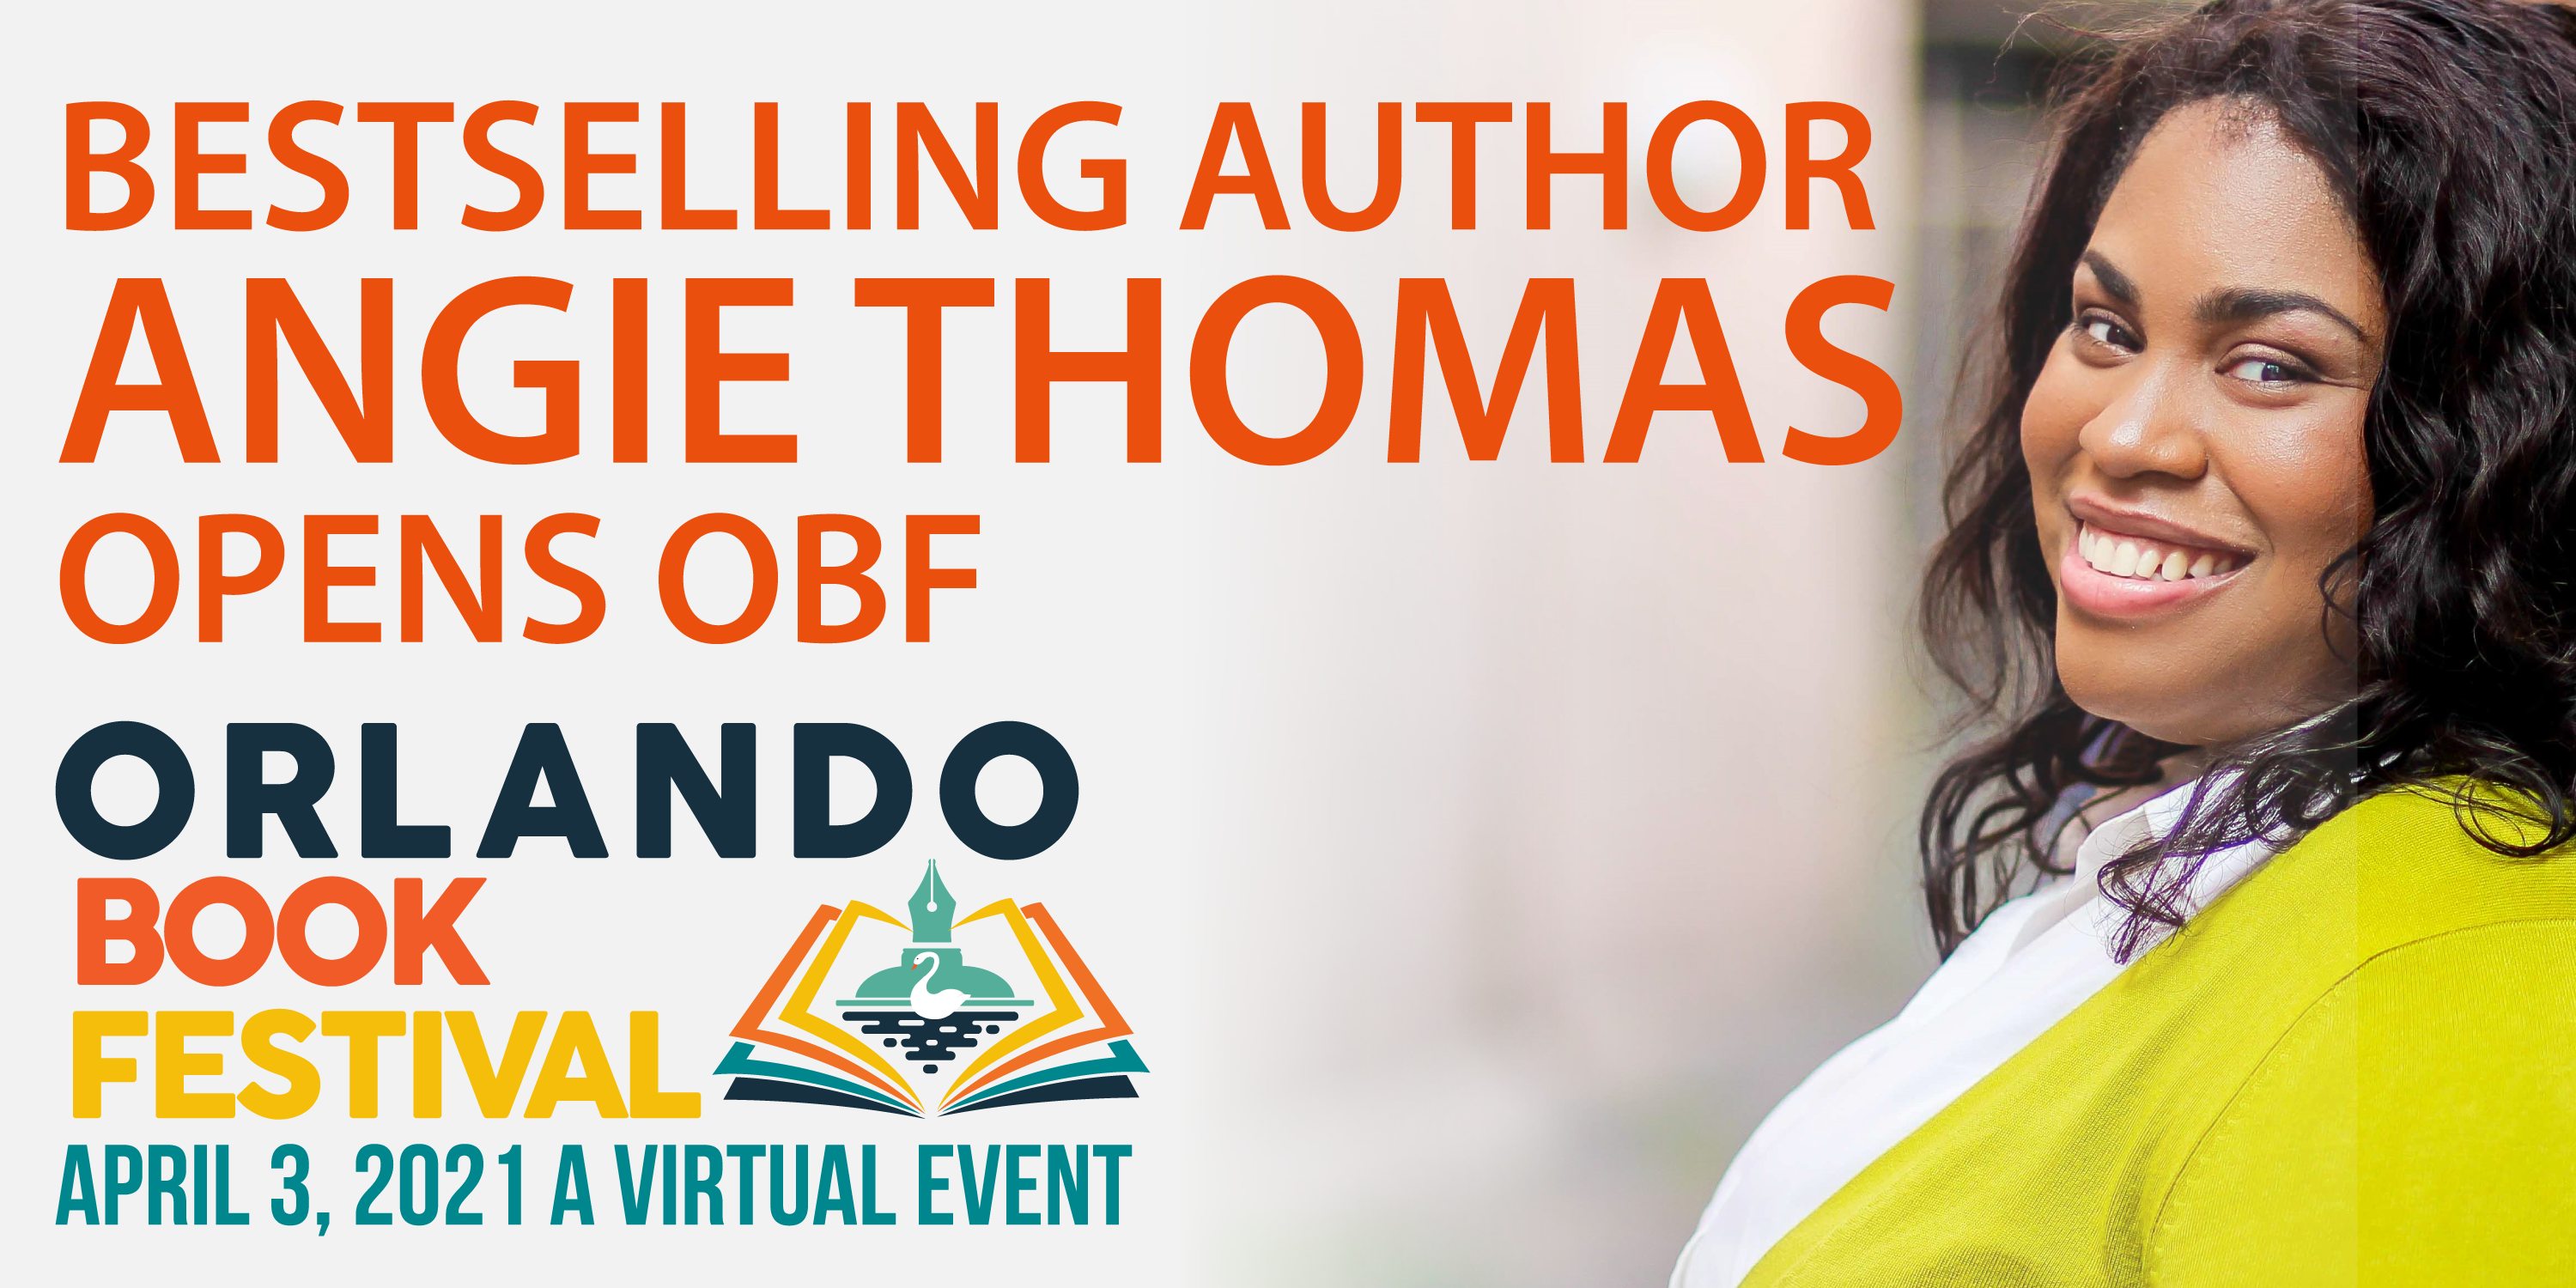 Bestselling Author Angie Thomas Opens OBF